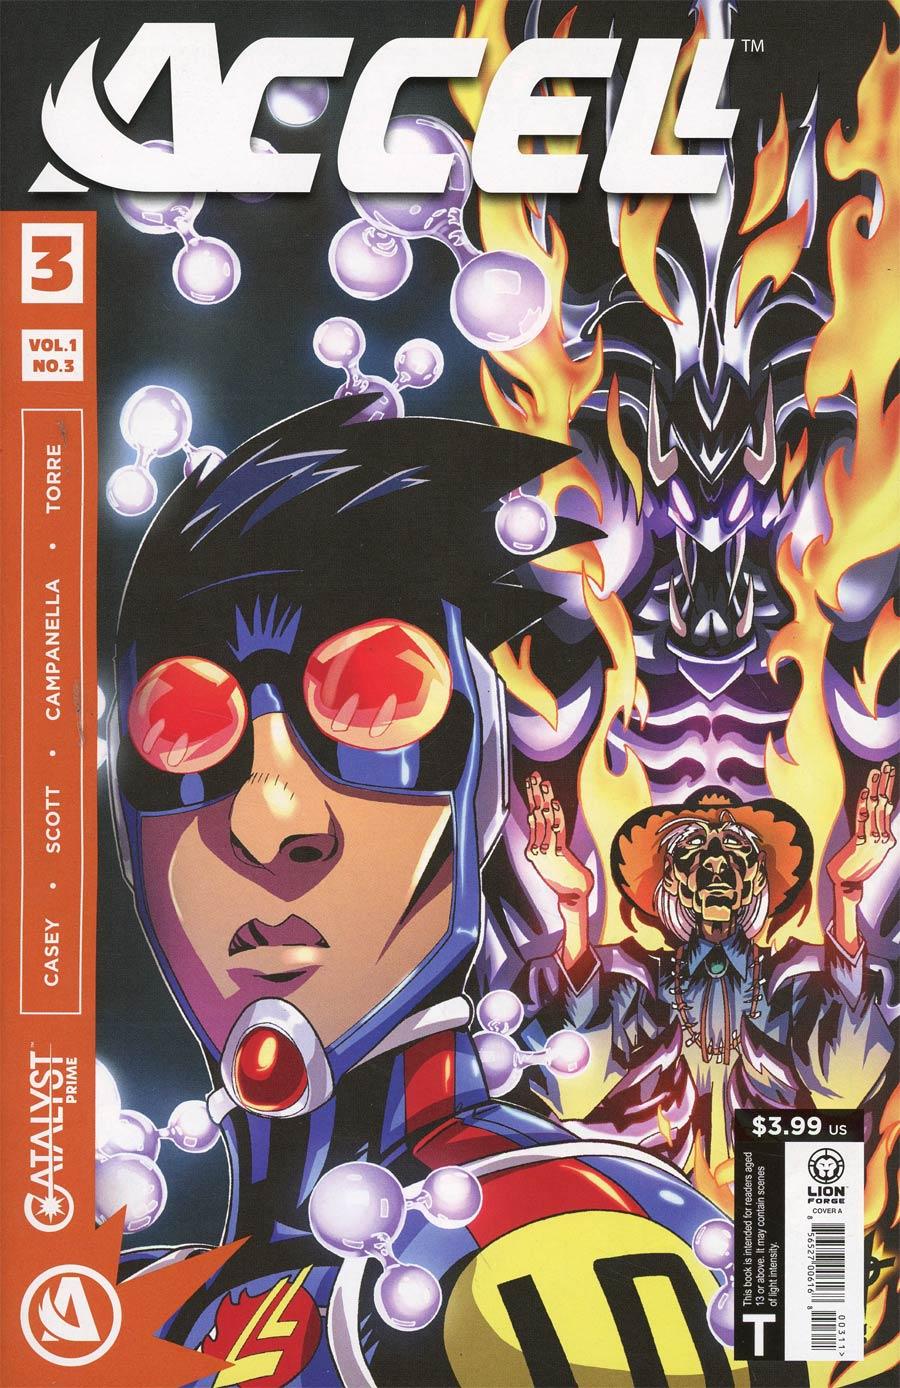 Catalyst Prime Accell Vol. 1 #3